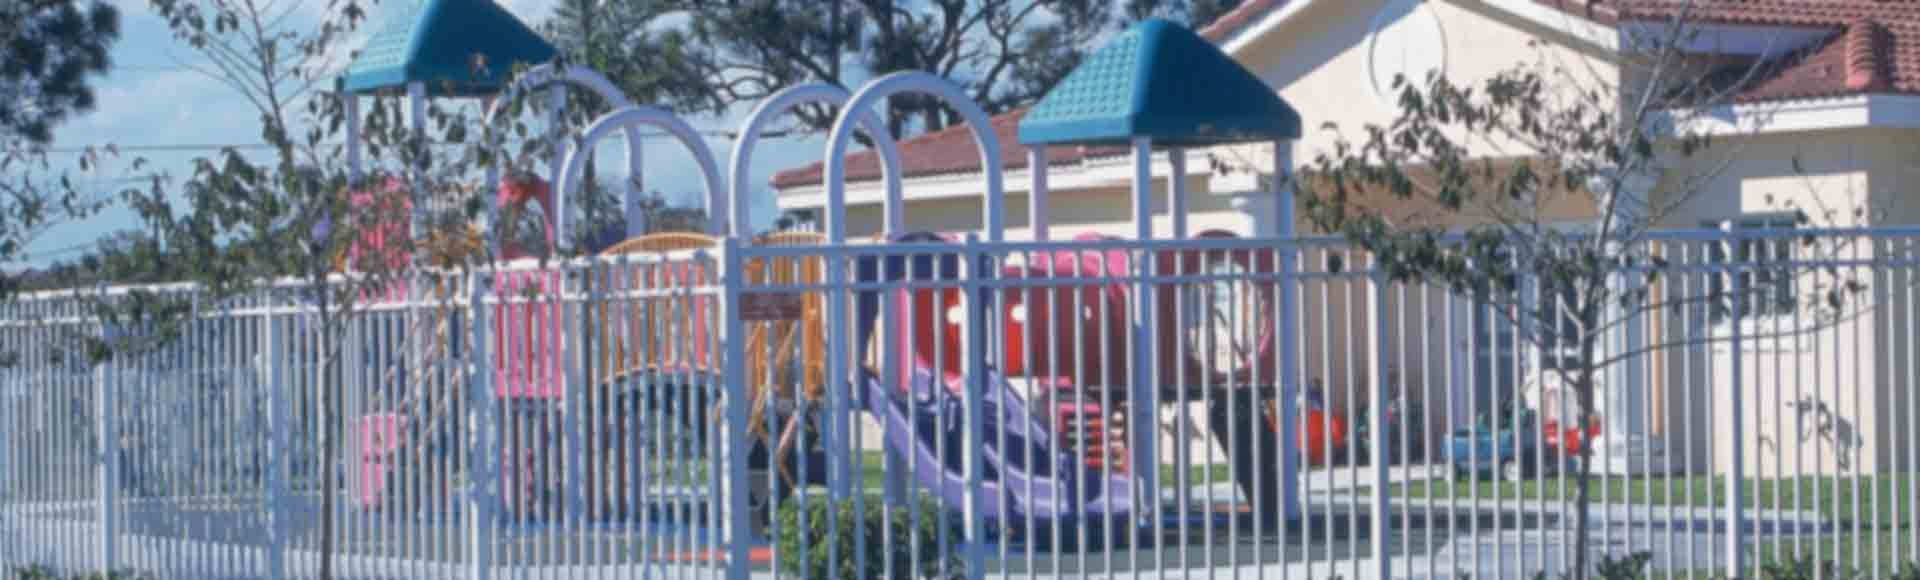 Designing with Amenities for a Safe Playground